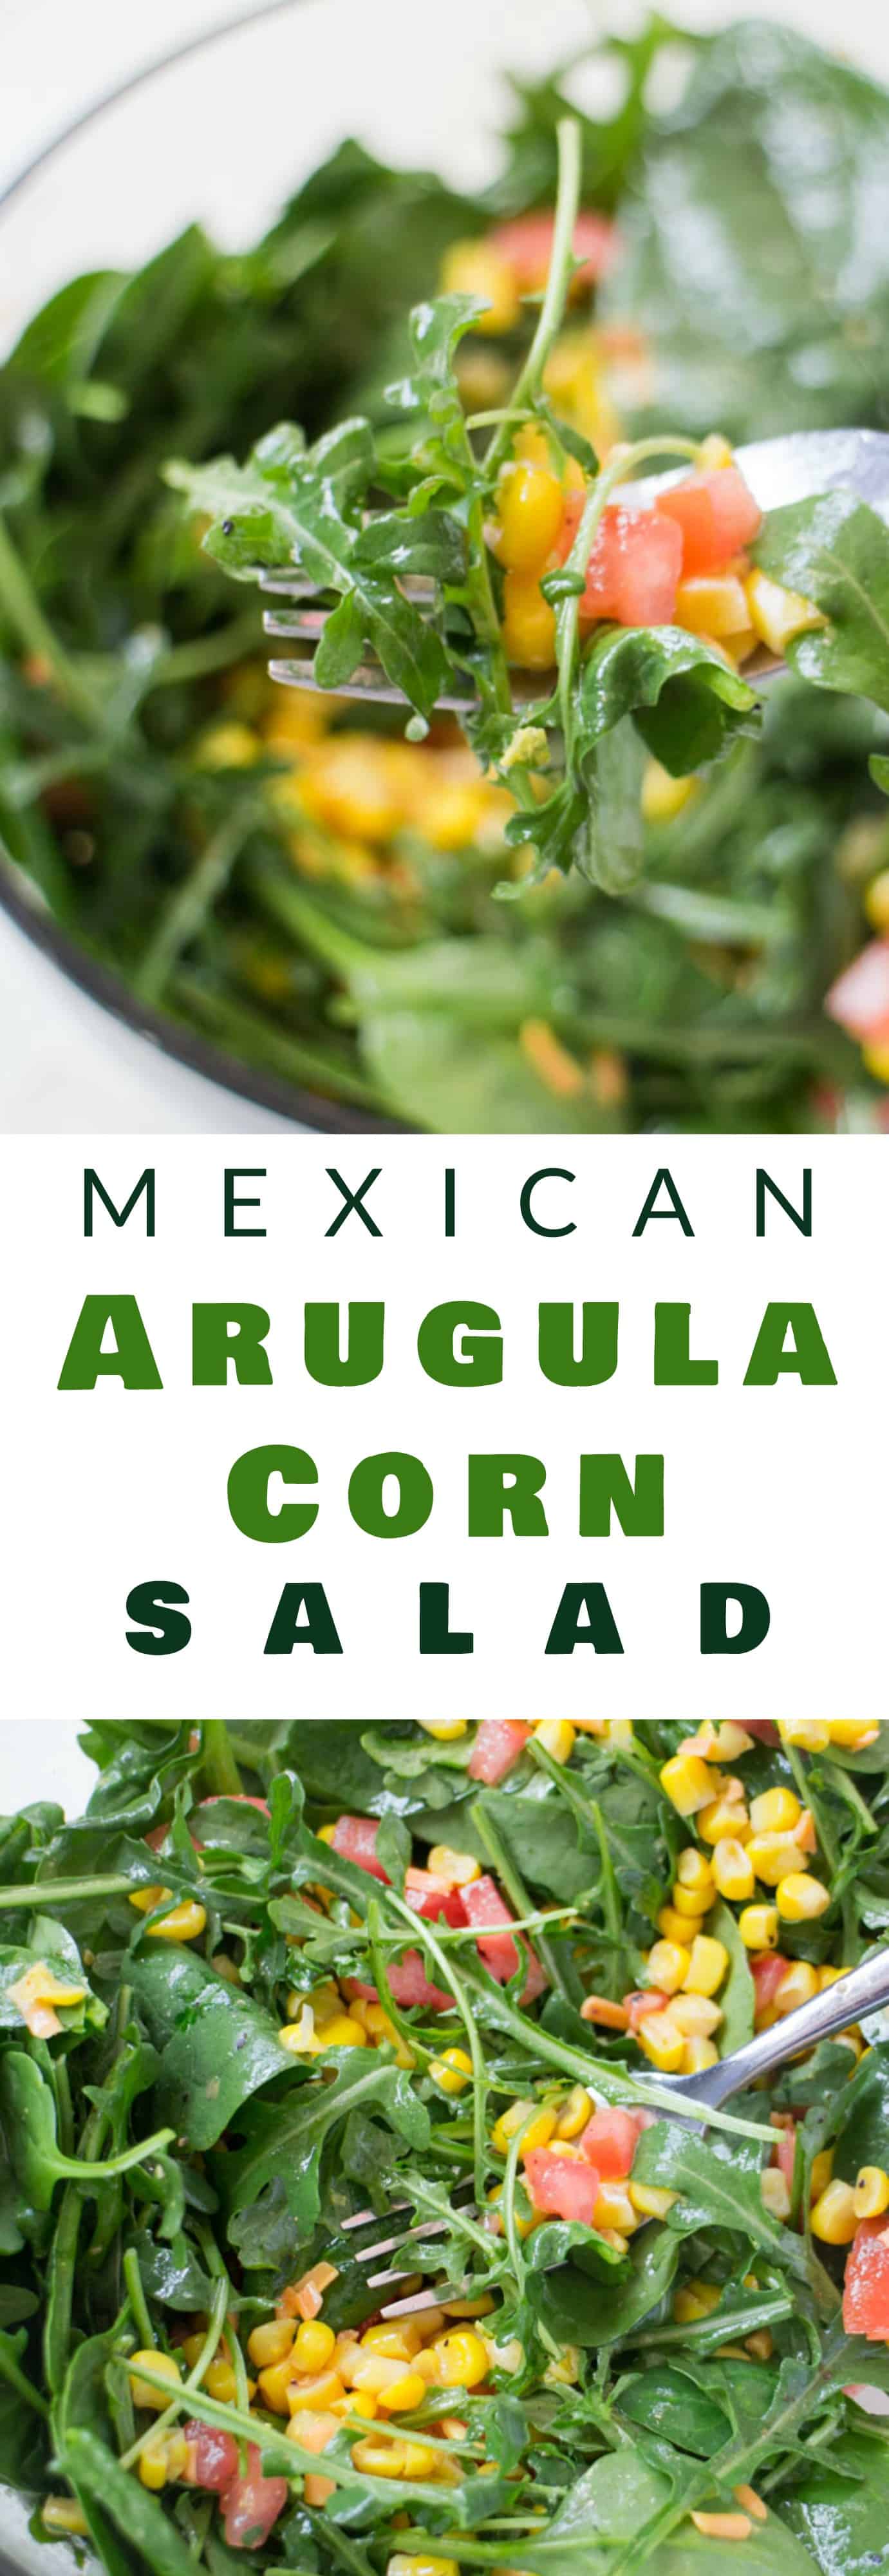 EASY Mexican Arugula Corn Salad with Lime Olive Oil dressing! This simple, healthy salad recipe includes Arugula, Spinach, Tomatoes, Corn and a Olive Oil/Lime/Cumin dressing to give it a Mexican taste! This is a perfect side salad but could easily turn into a main course if you add chicken to it. My family loves this salad, it makes healthy eating easy!